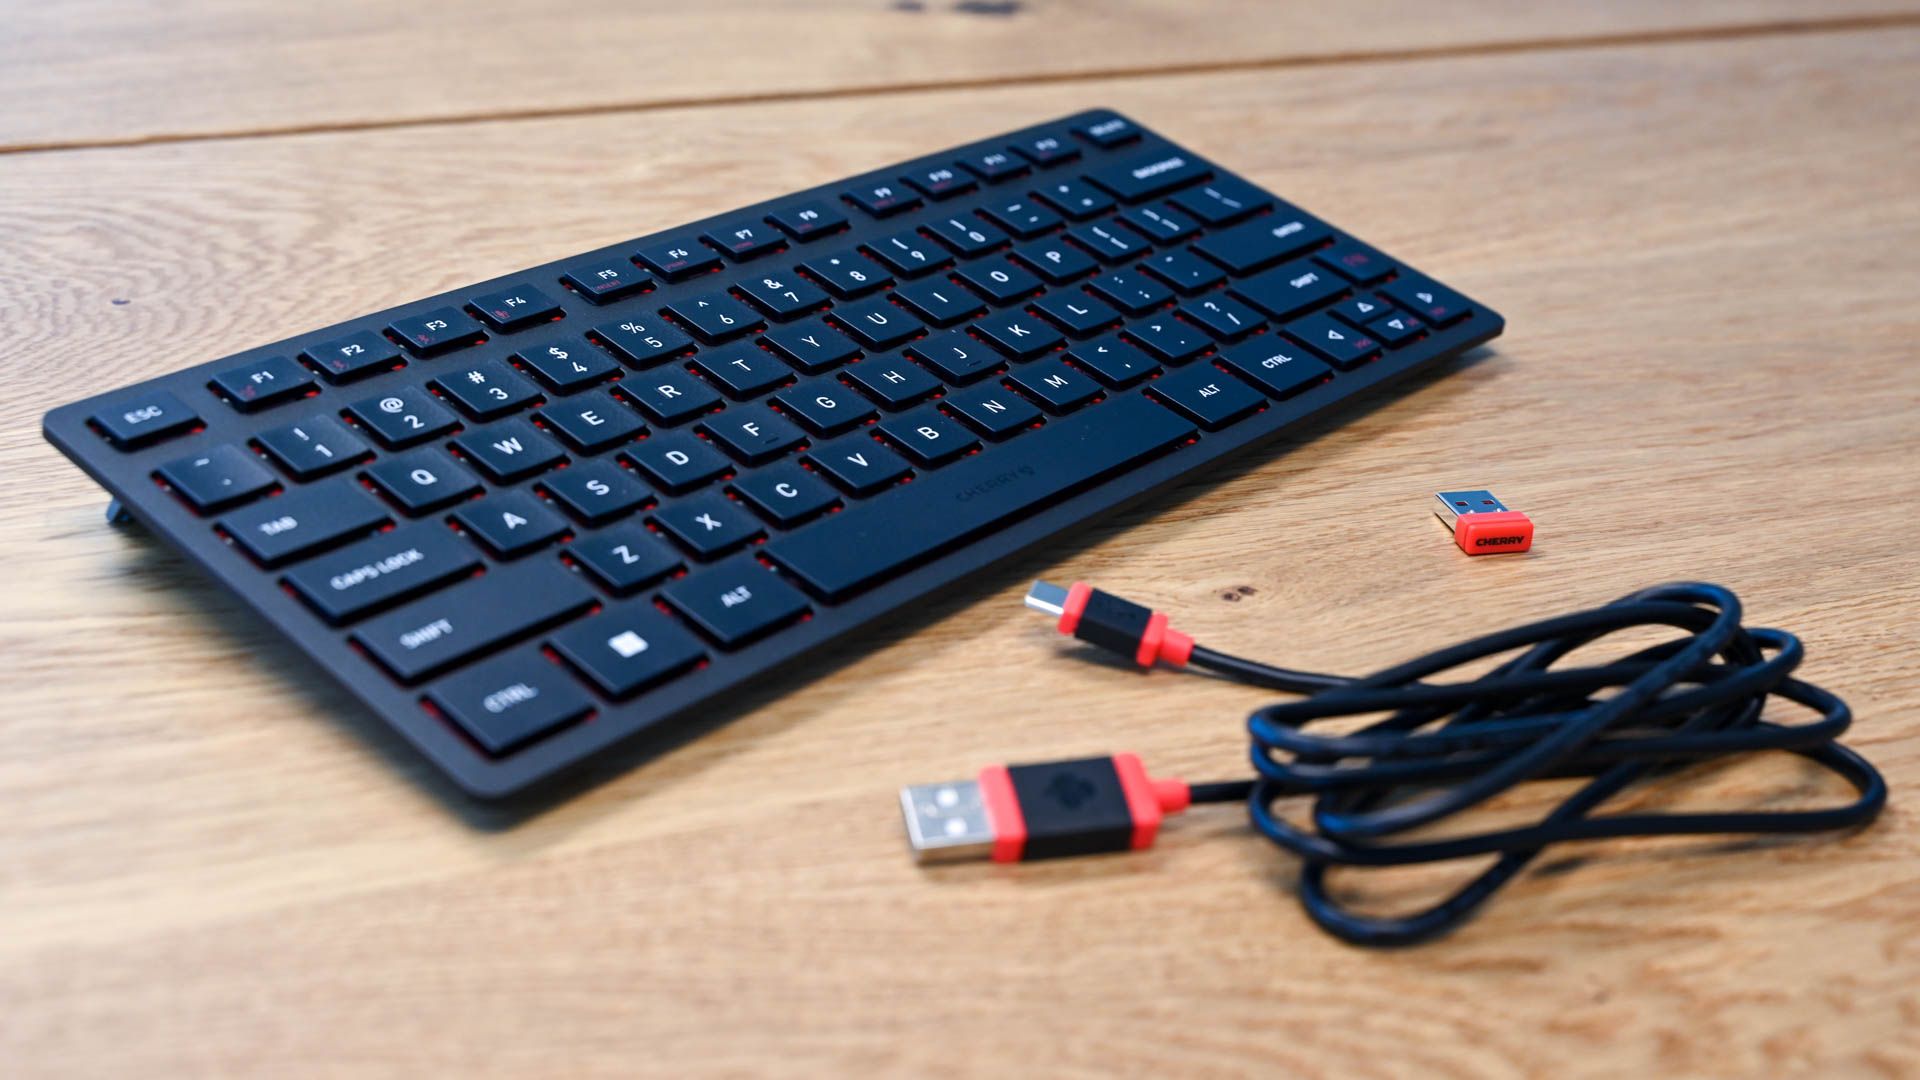 Cherry KW 9200 Mini Keyboard with cable and Bluetooth dongle